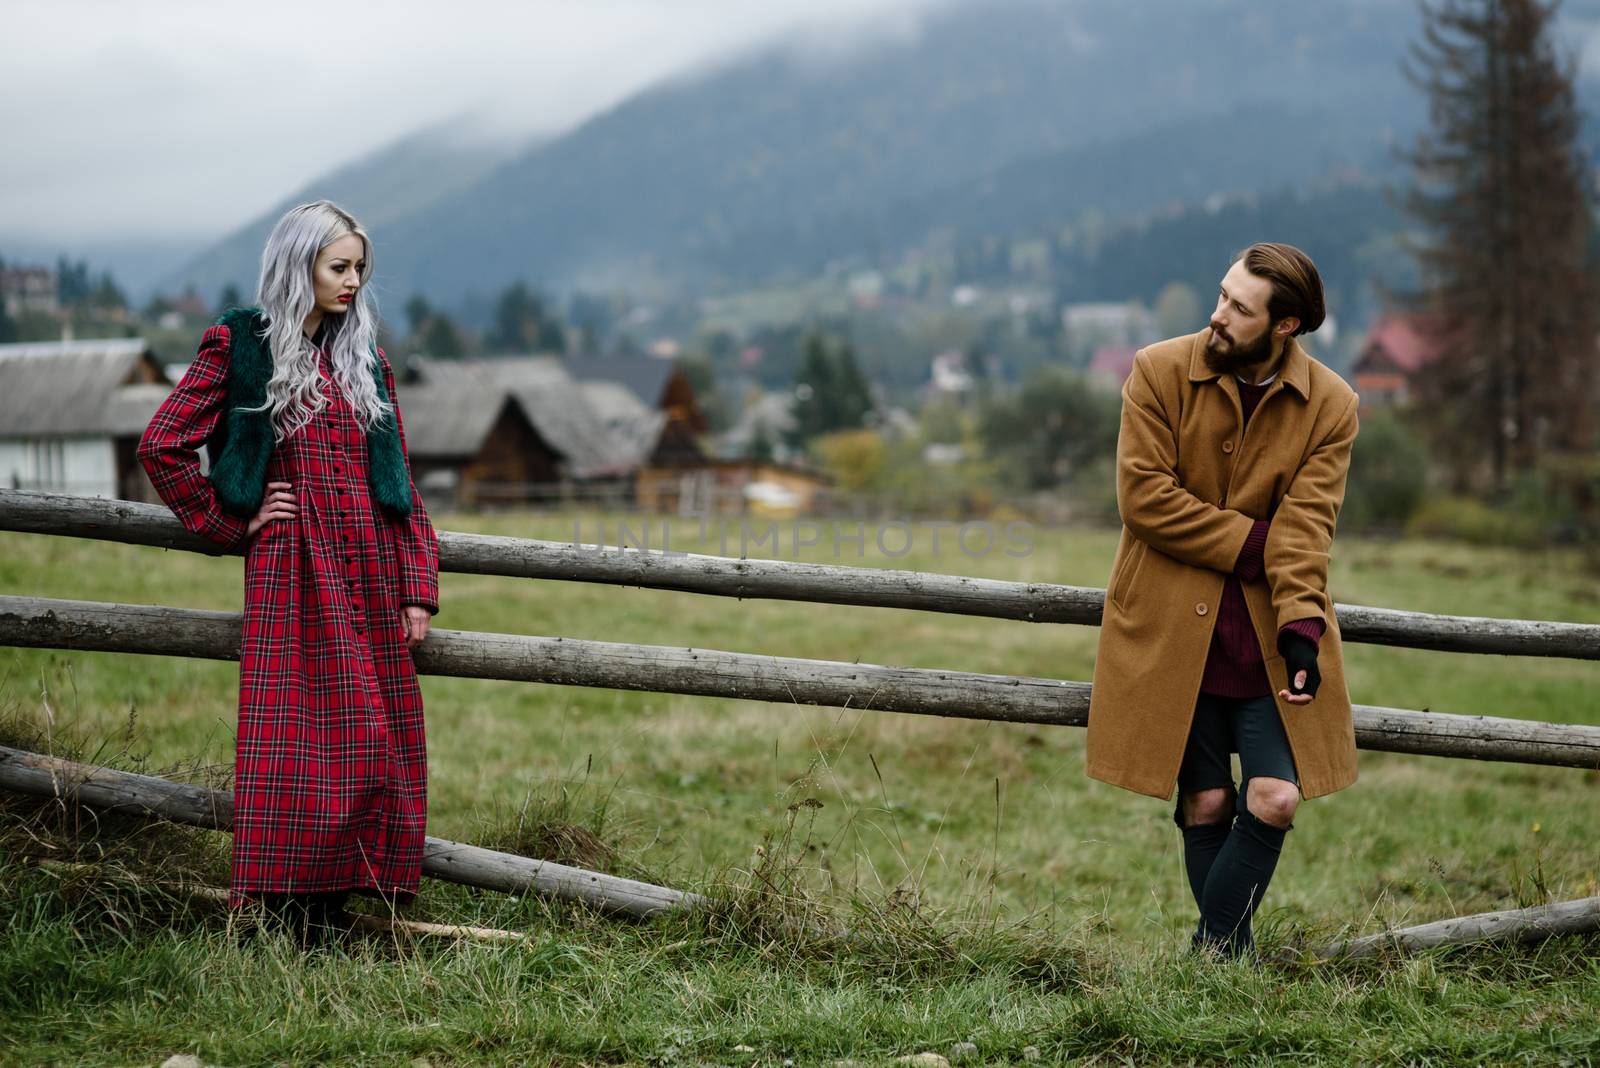 pair of lovers in the Carpathian mountains in national costumes